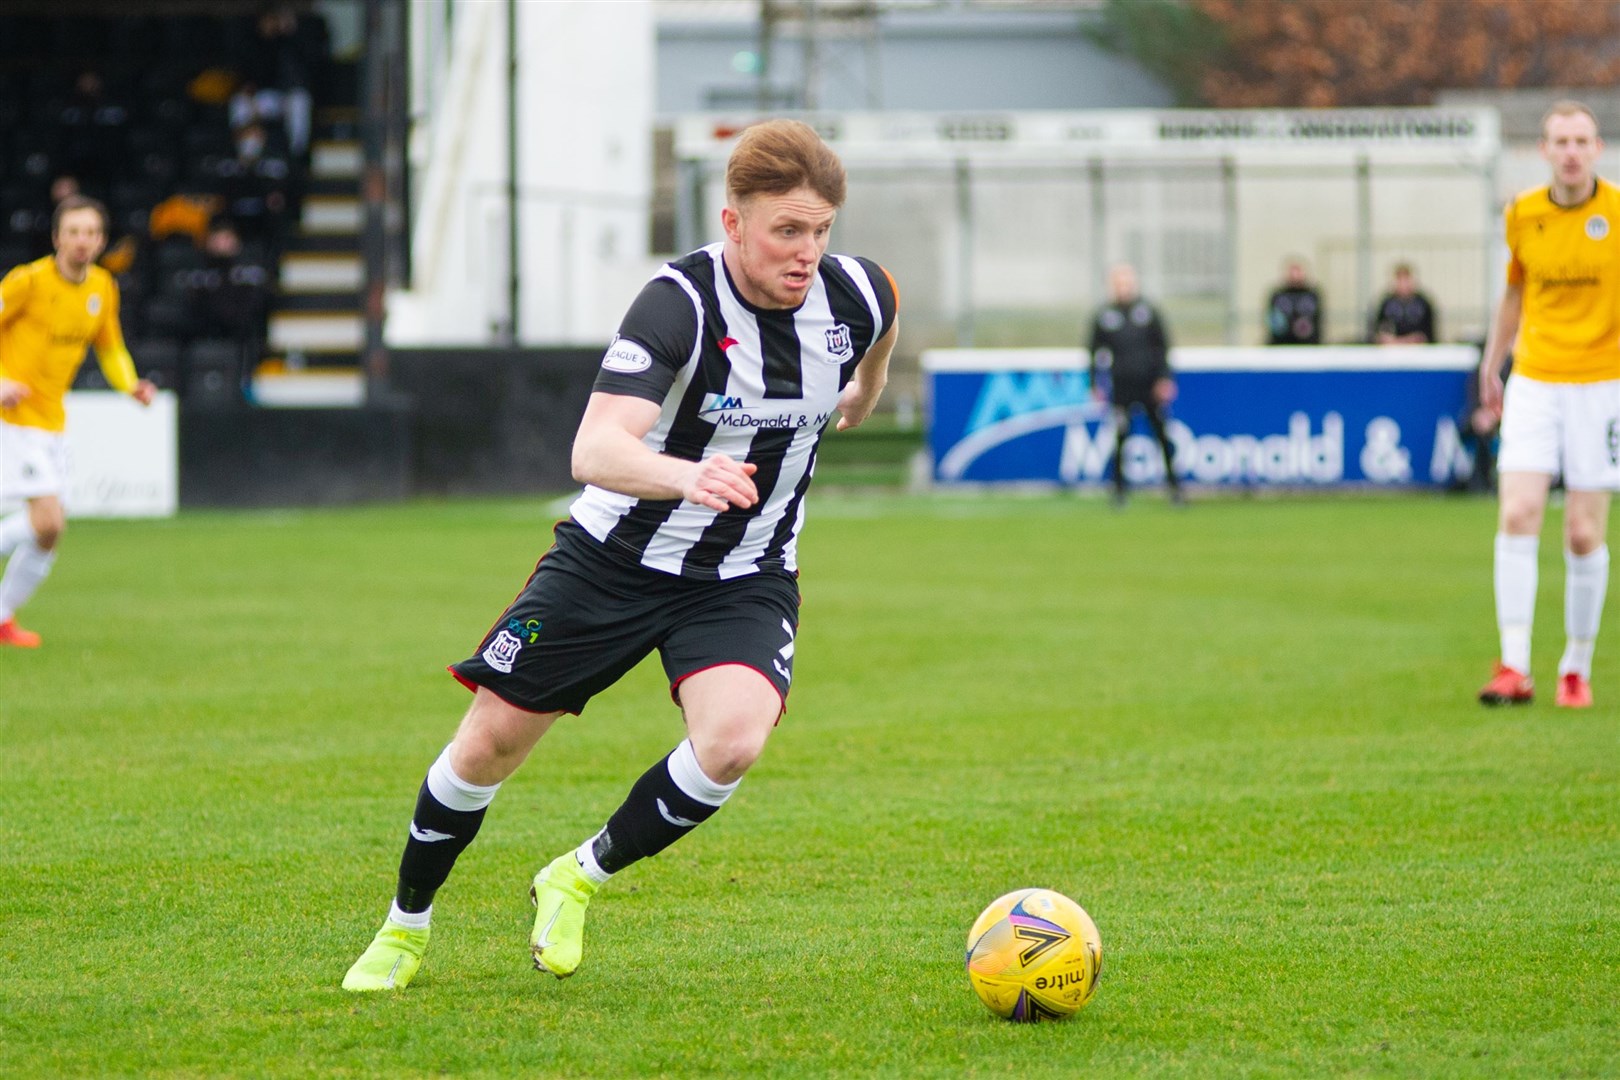 Tony Dingwall is set to sign on for another season at Elgin City. Picture: Daniel Forsyth..